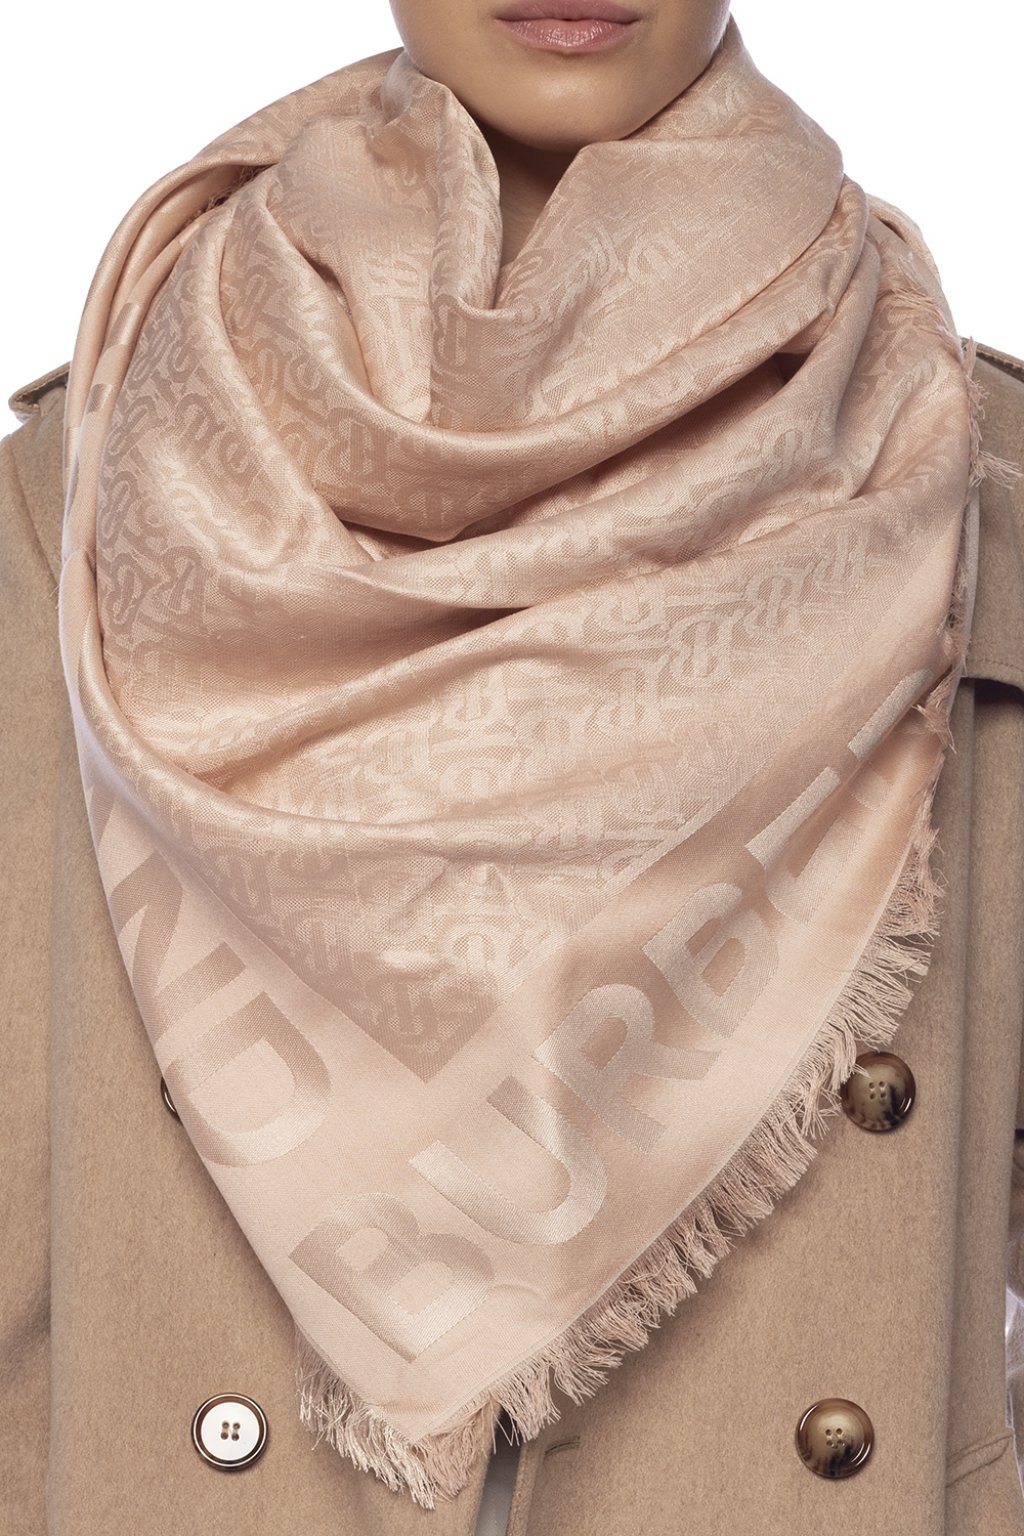 burberry patterned scarf